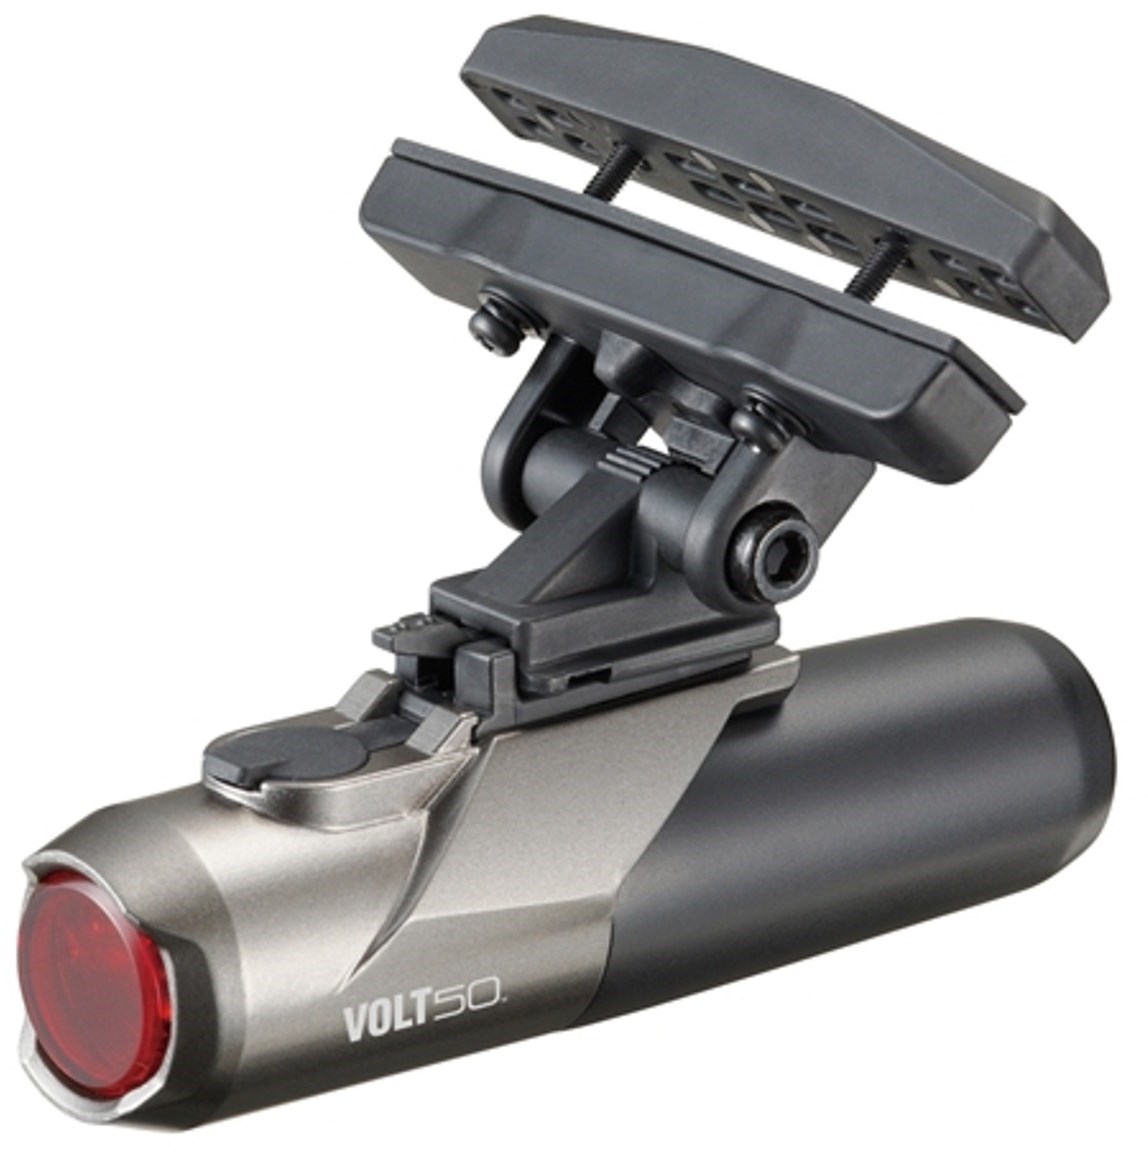 Cateye Volt 50 Rechargeable USB Rear Light product image